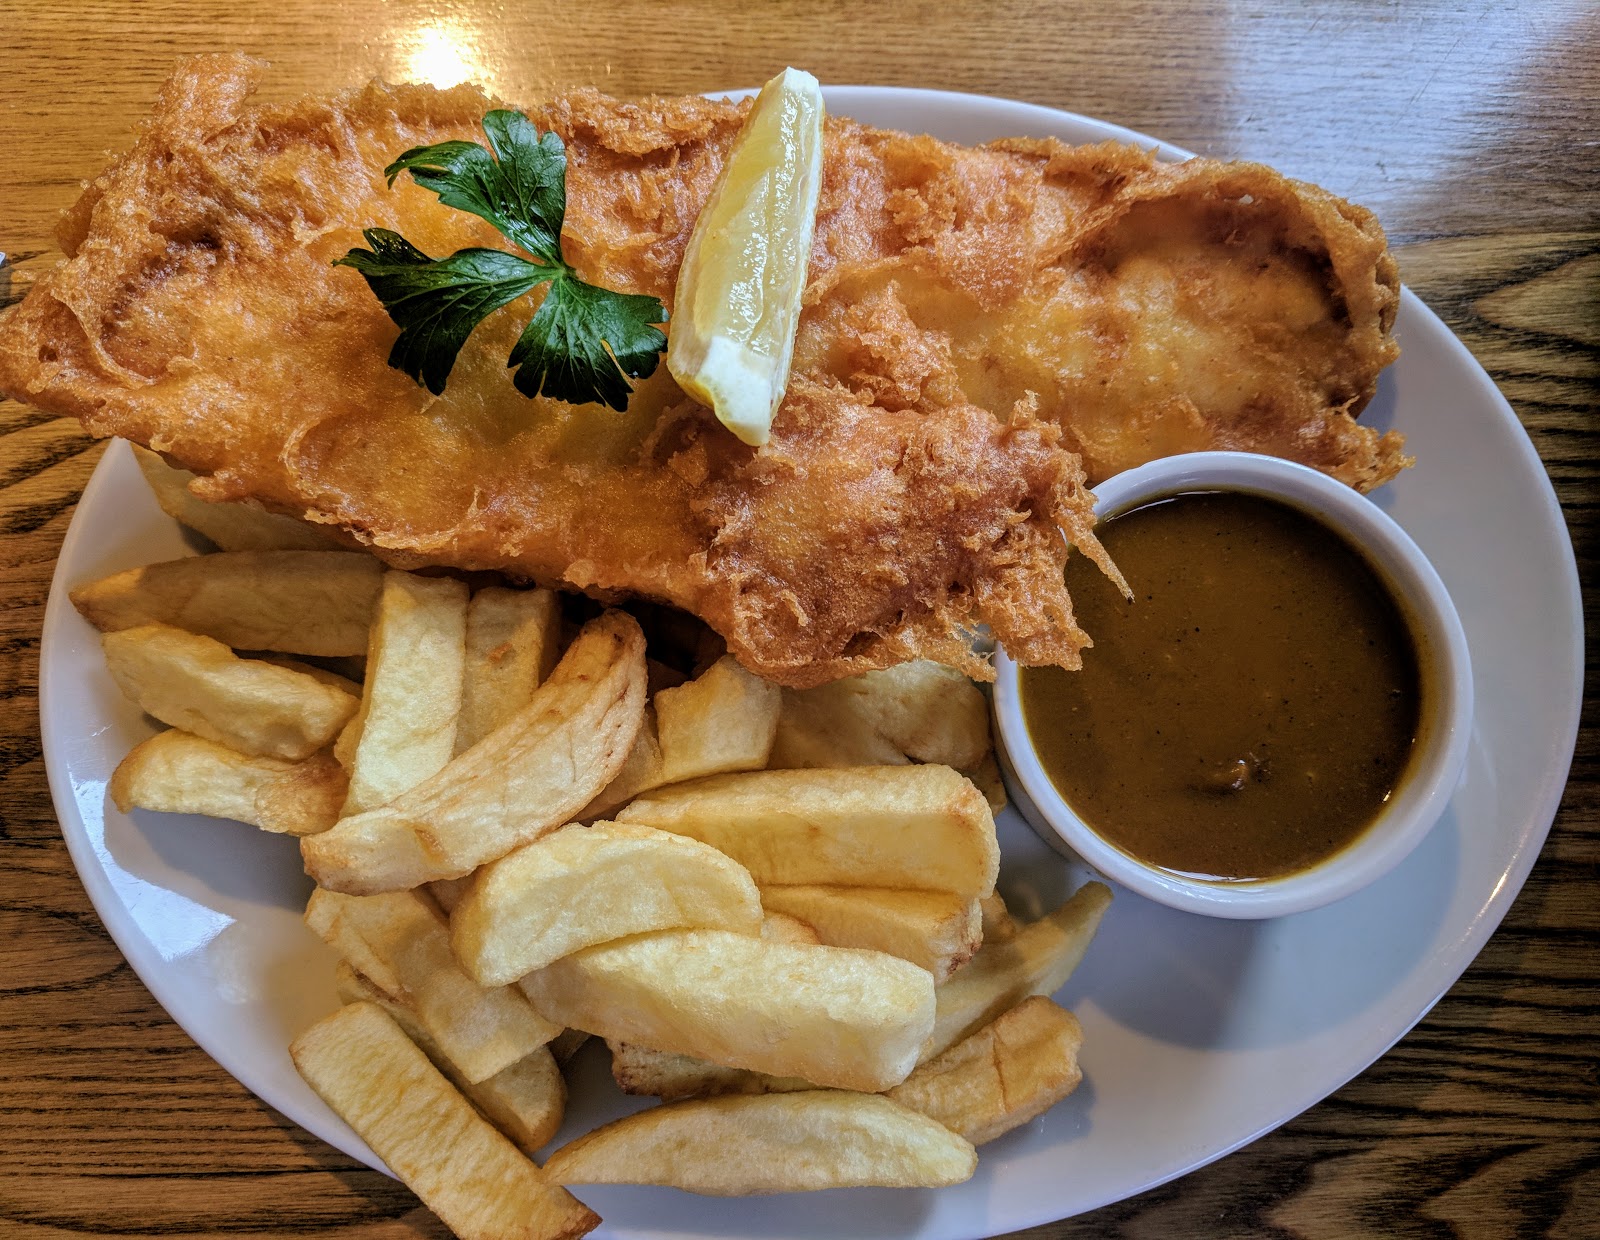 10 Family-friendly places to take the kids for fish and chips in North East England this Good Friday 